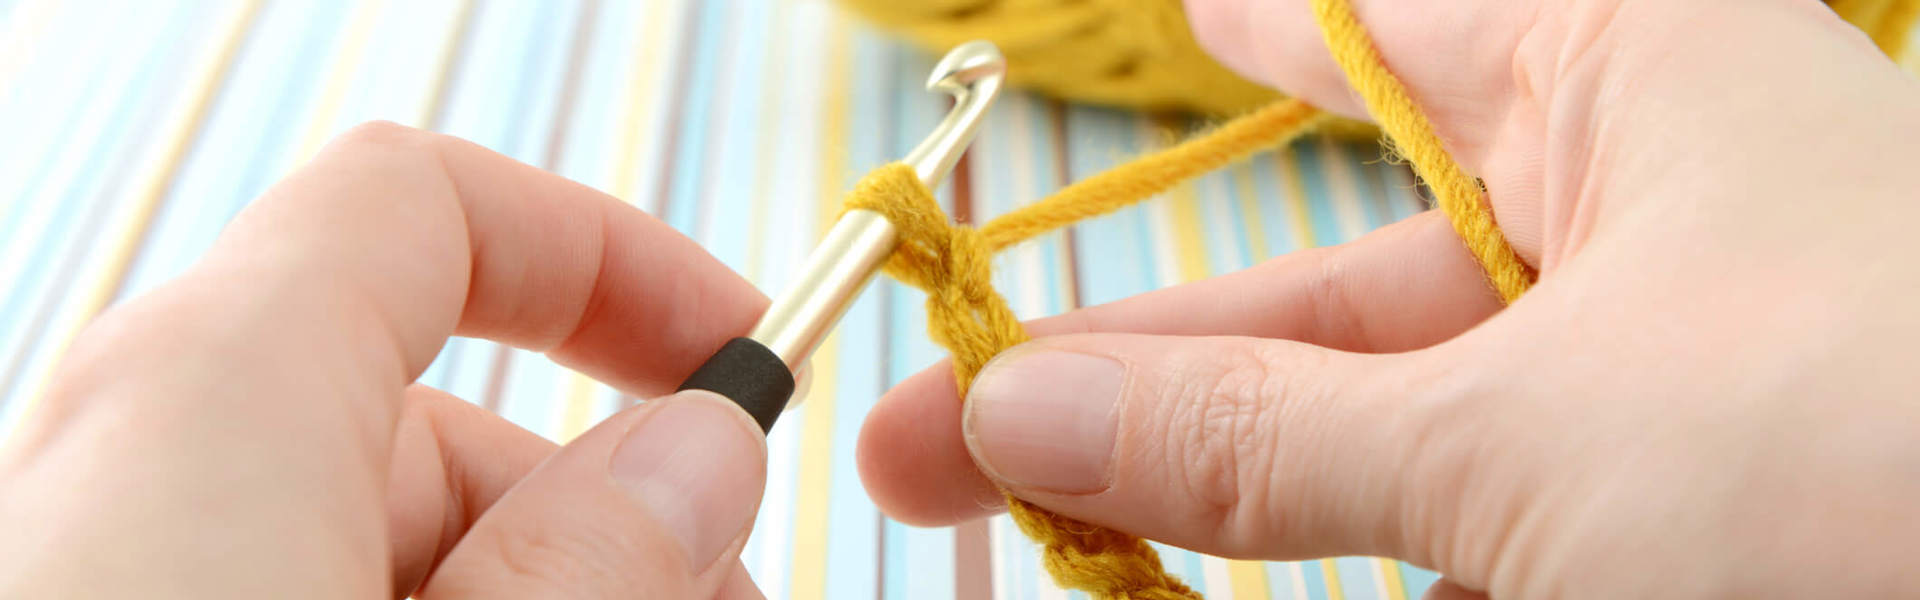 a person crocheting with a crochet hook and yellow yarn